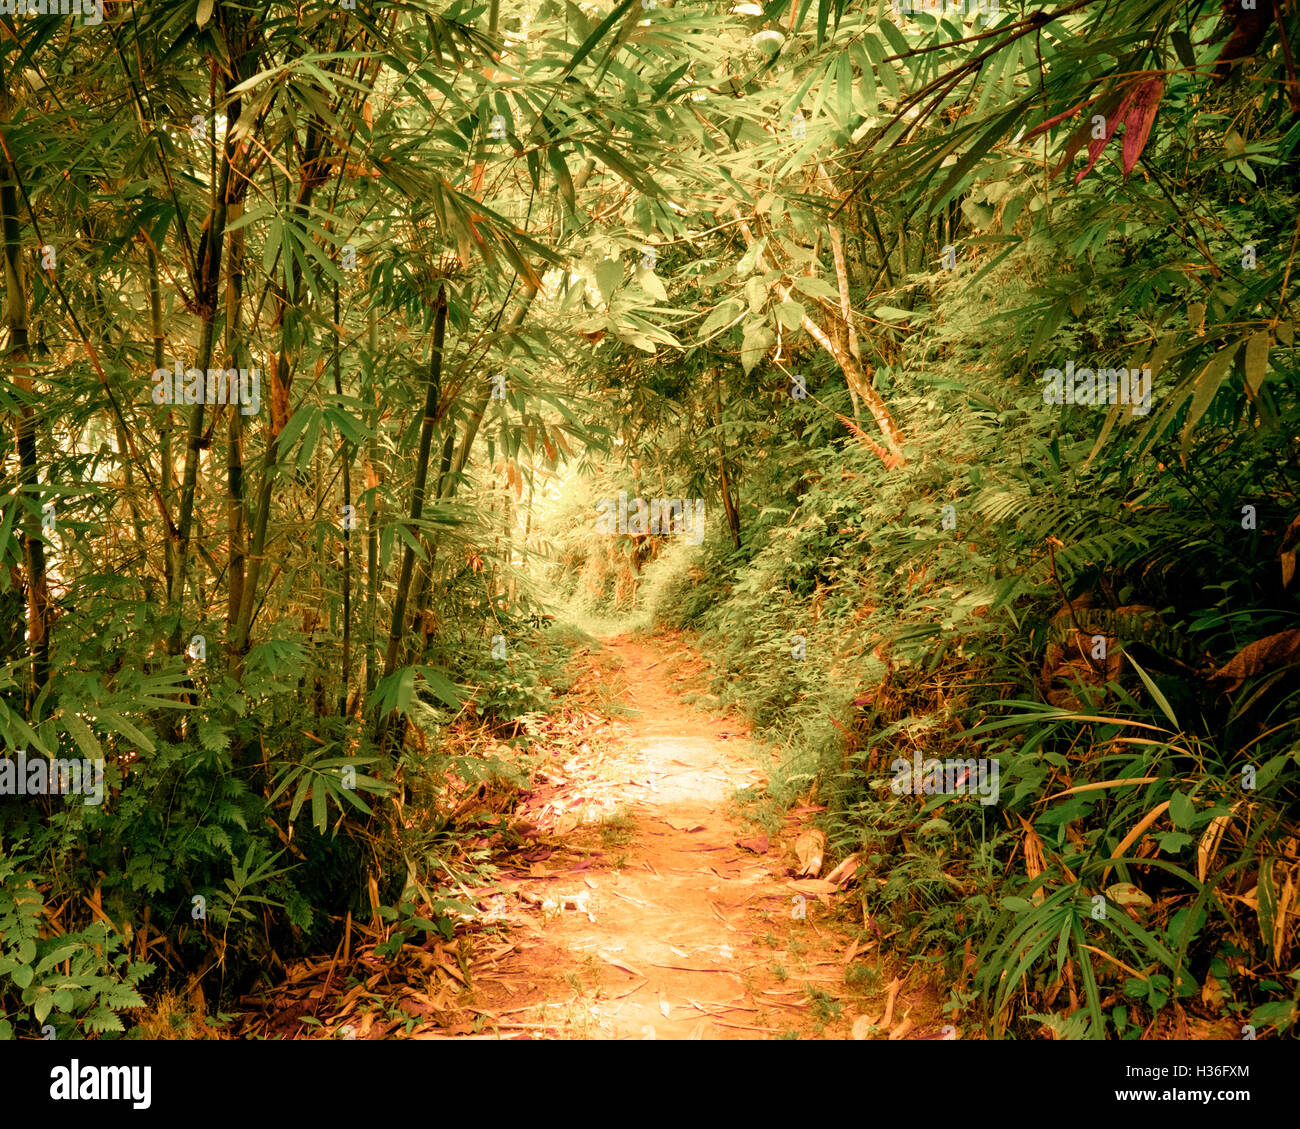 Surreal colors of fantasy landscape at tropical jungle forest with tunnel and path way through dense vegetation Stock Photo